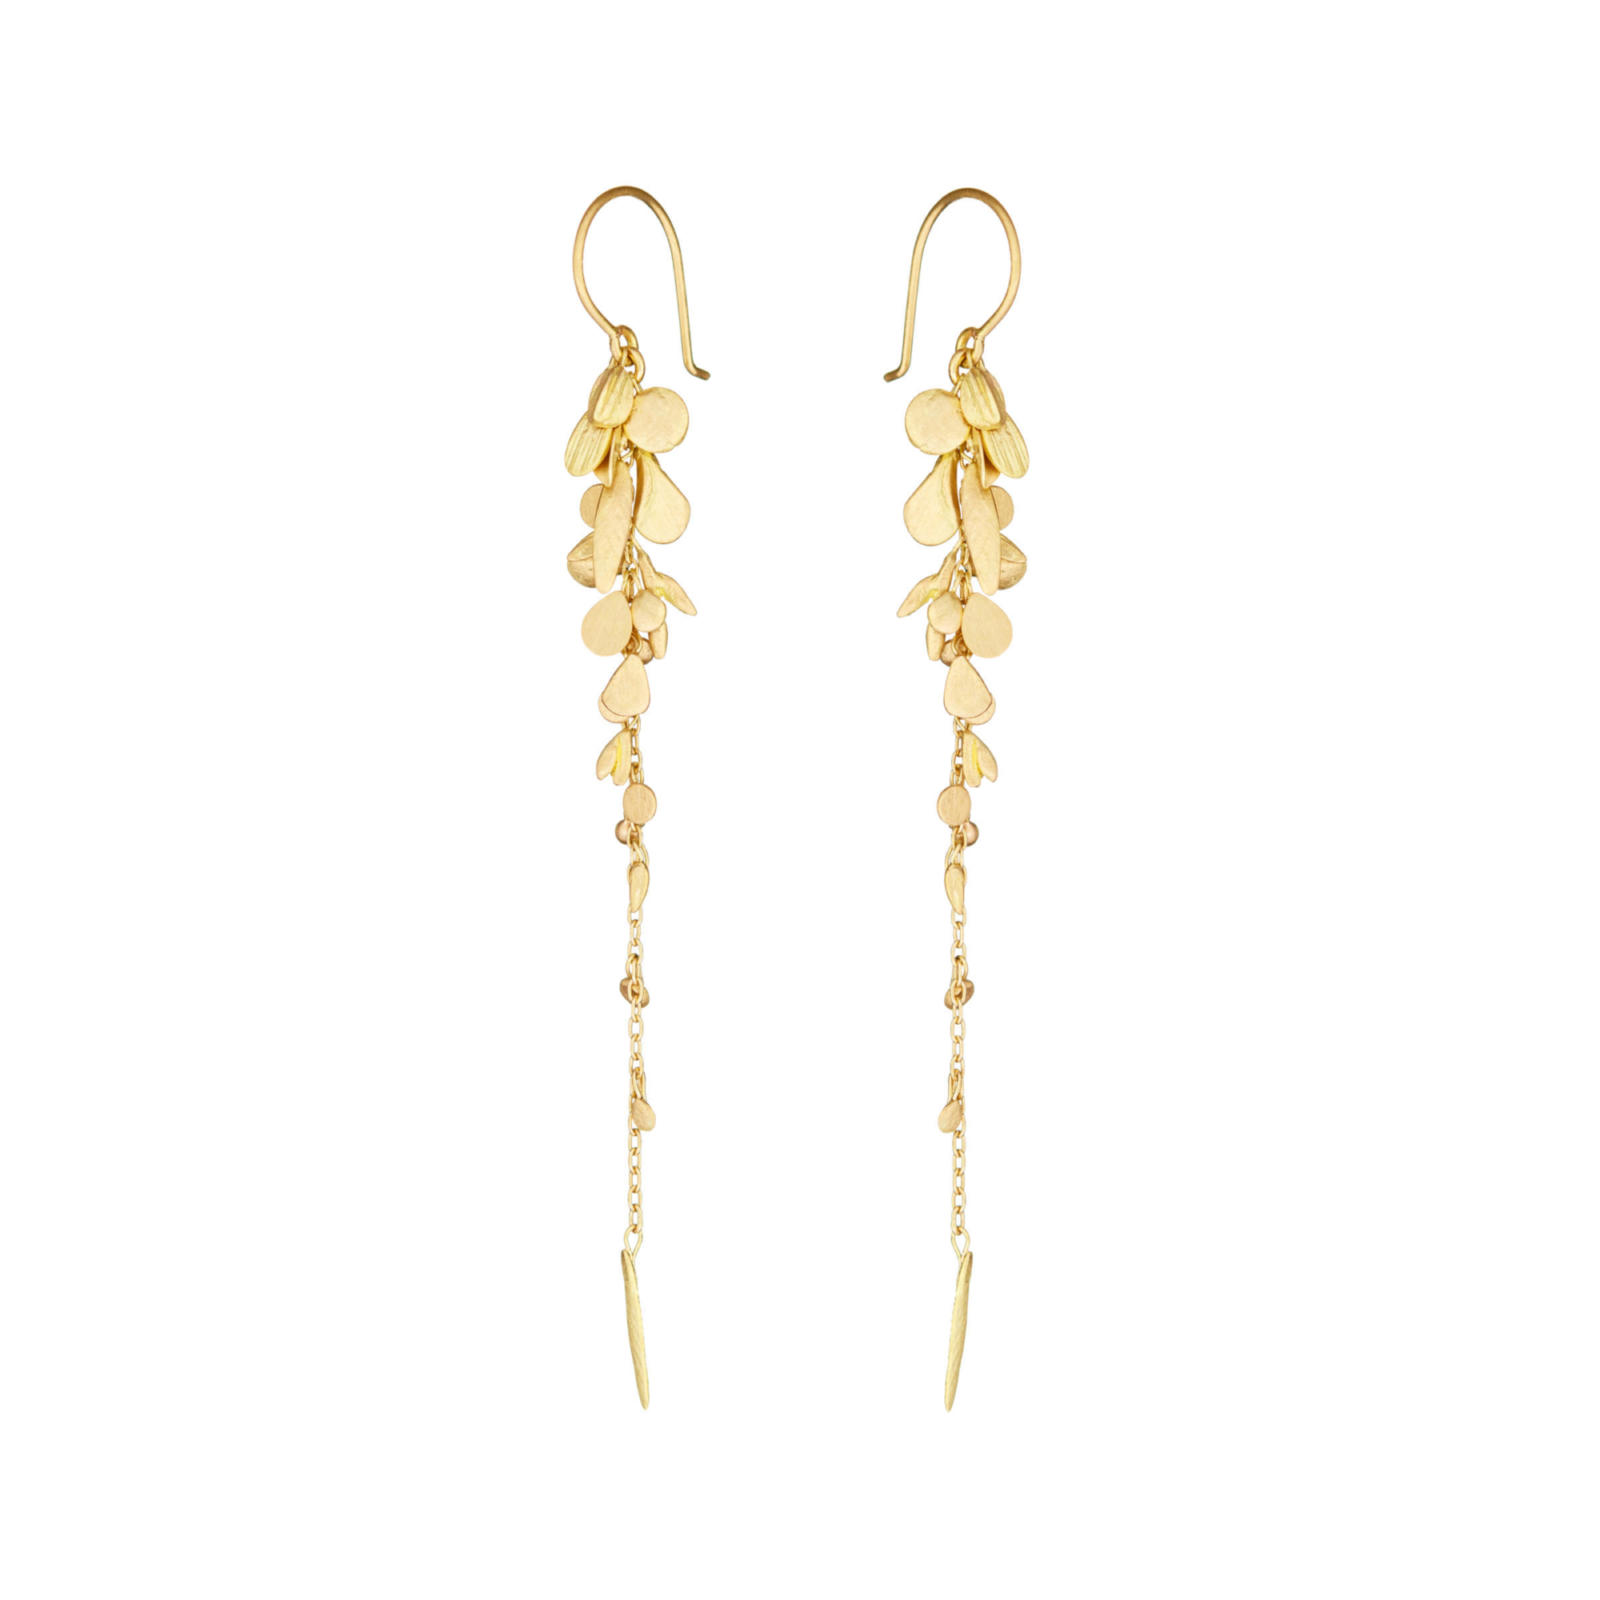 Sia Taylor ME2 Y Yellow Gold Earrings S